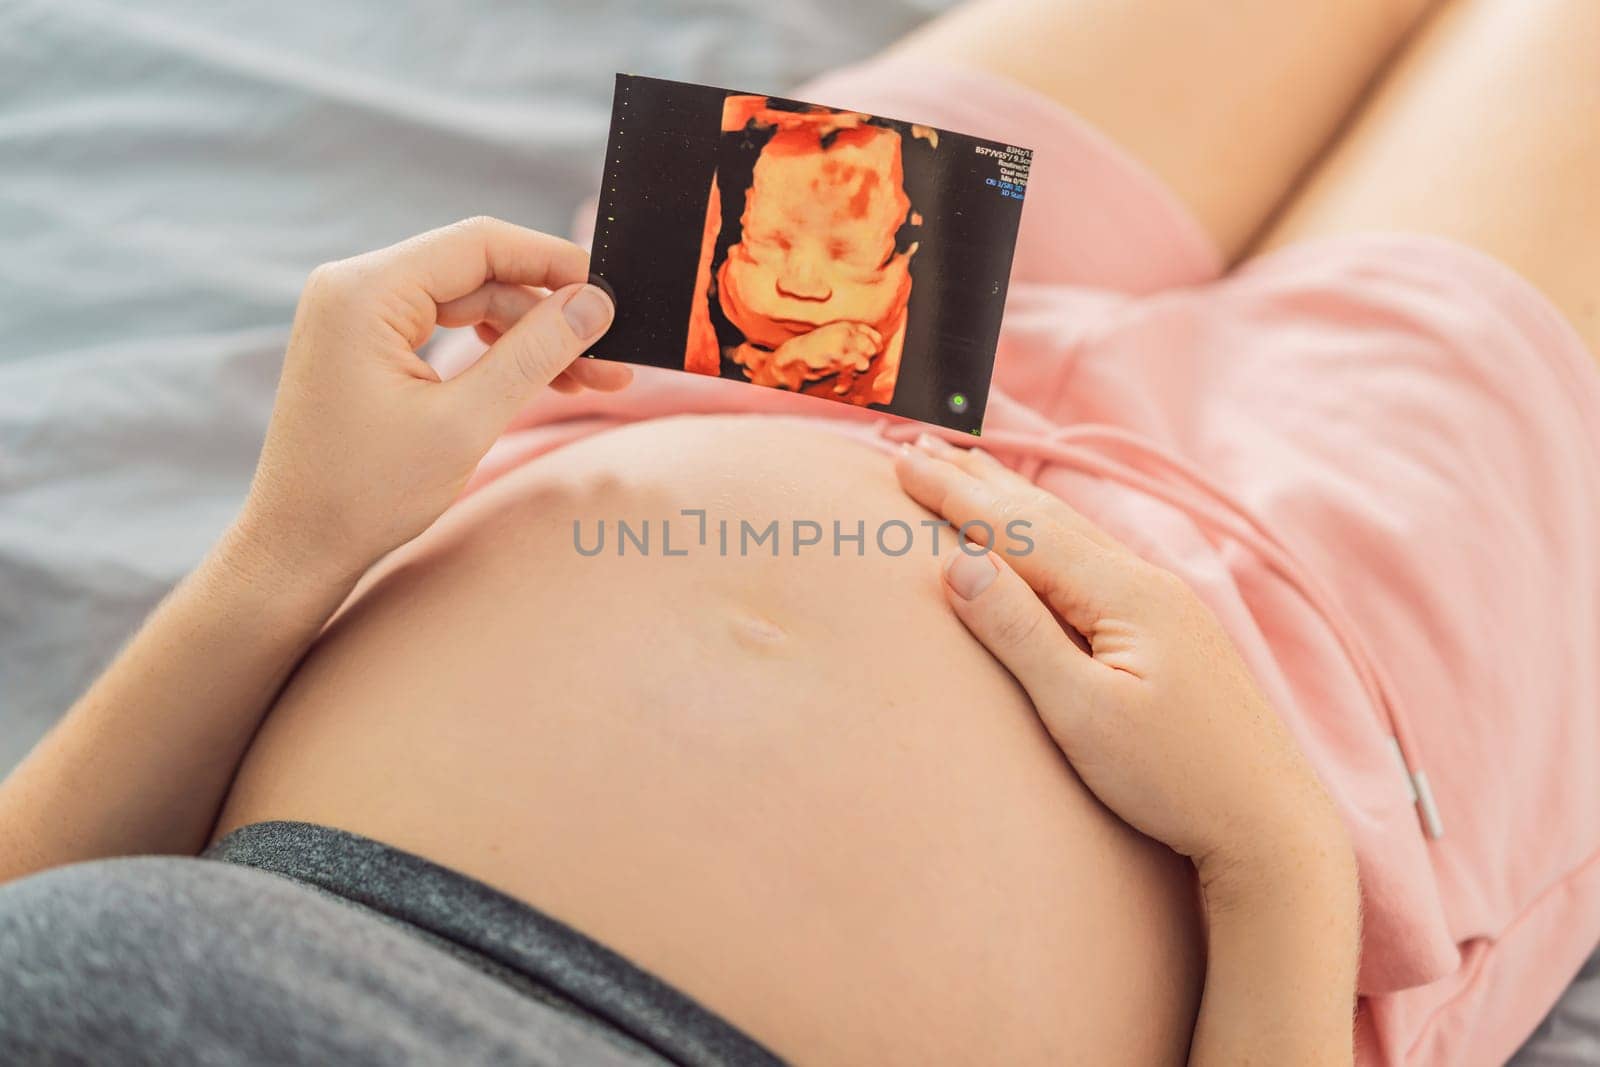 Expectant mother tenderly connects with her unborn child, holding ultrasound photo to her pregnant belly by galitskaya